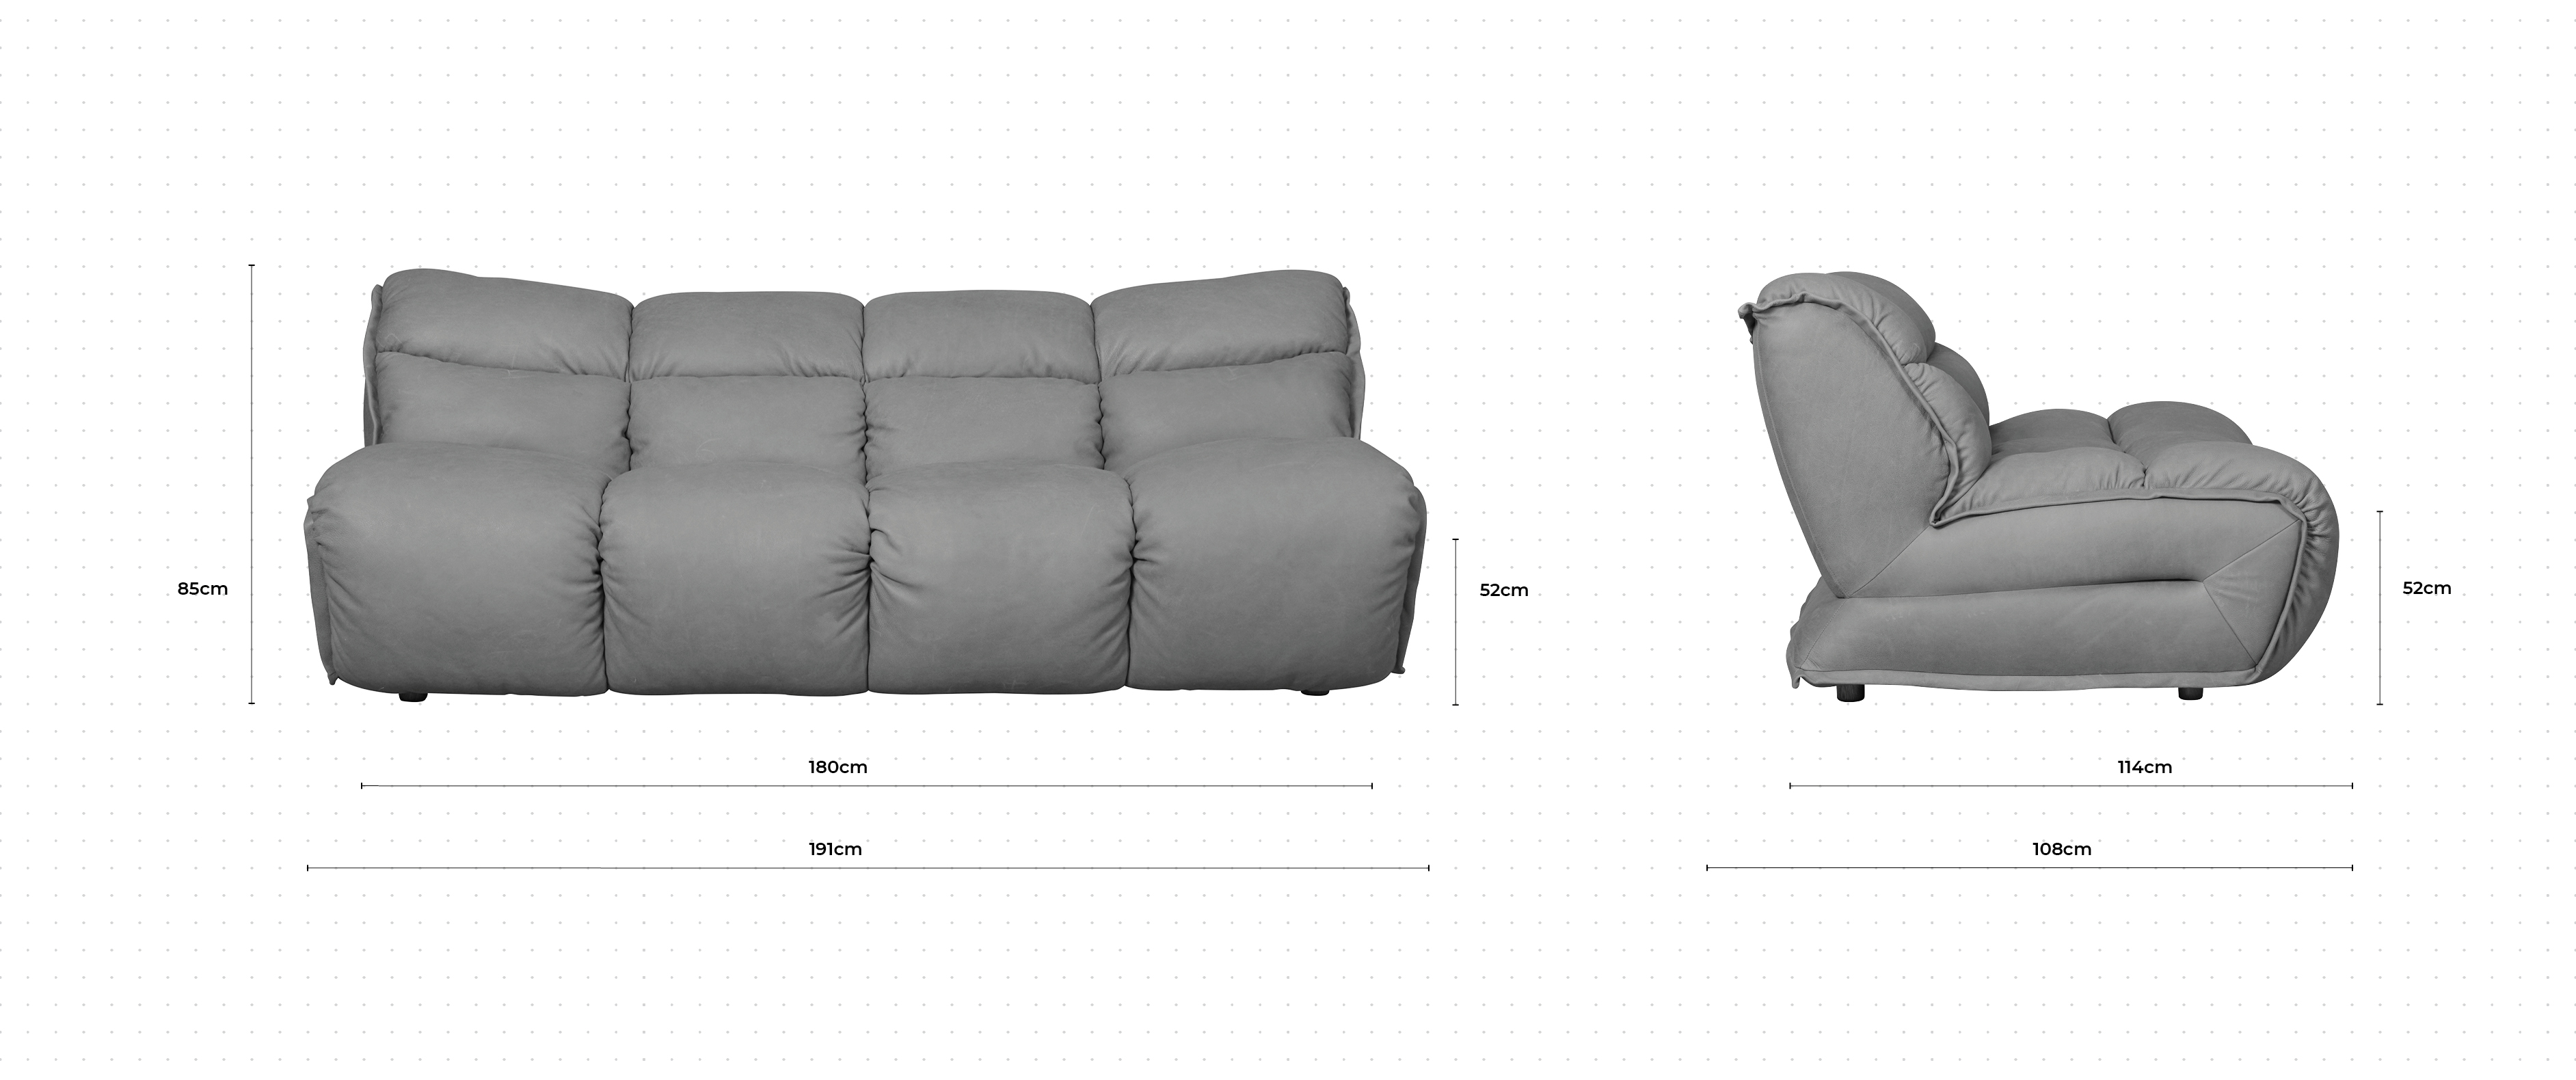 Groovy 3 Seater Sofa dimensions